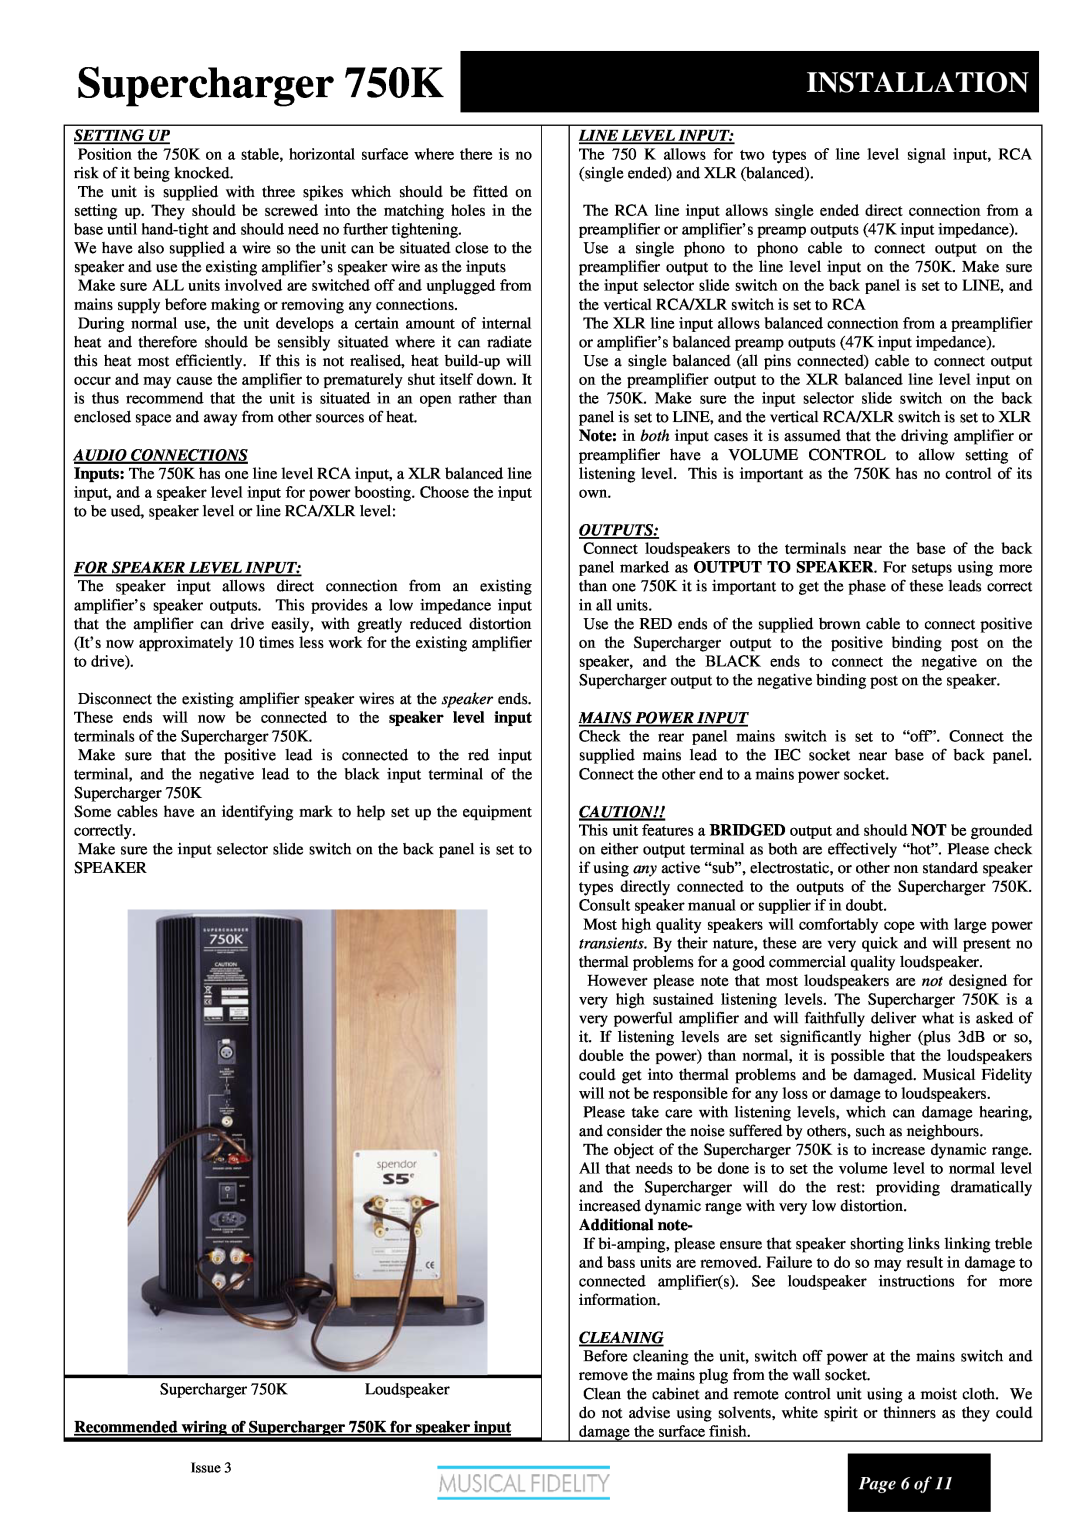 Musical Fidelity Installation, Supercharger 750K, Page 6 of, Setting Up, Audio Connections, For Speaker Level Input 